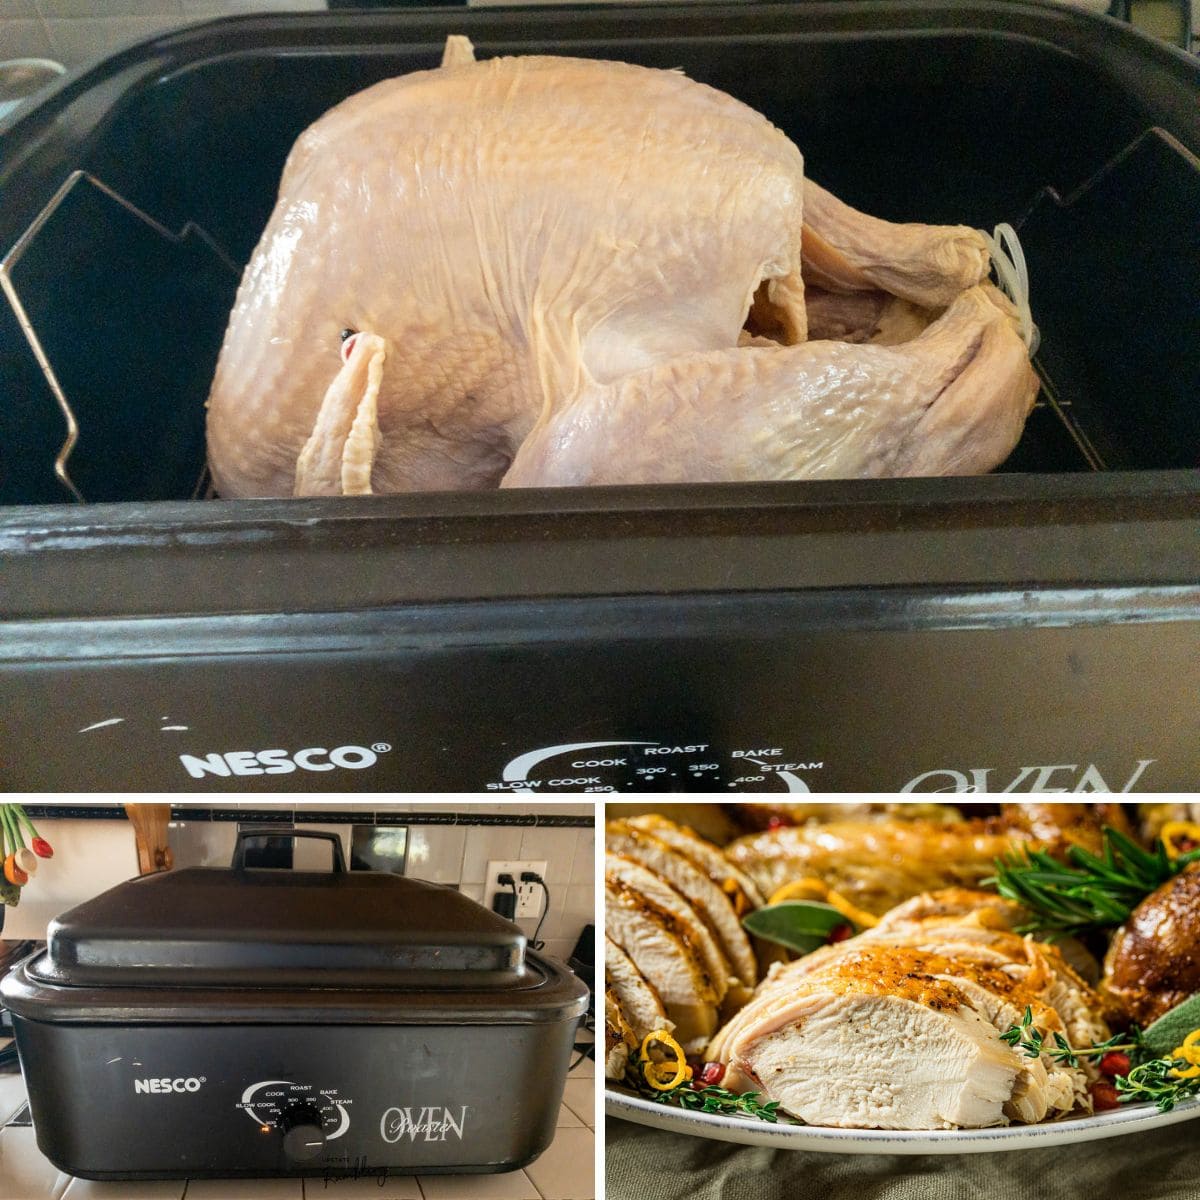 How You Should Position Your Oven Rack When Roasting Turkey